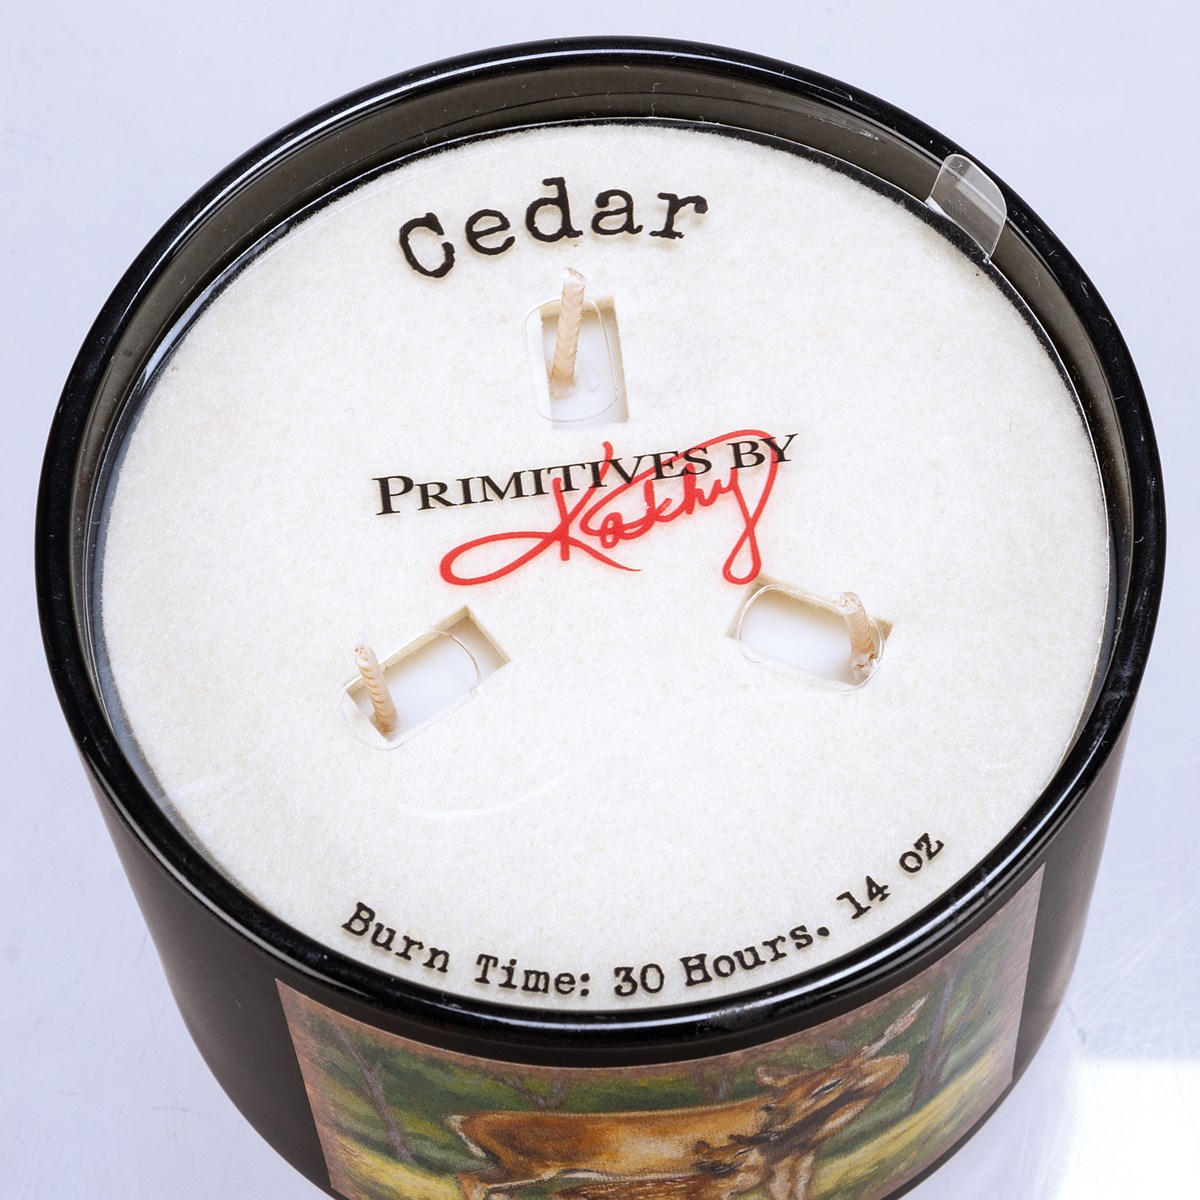 Deer Jar Candle - Soy Wax, Glass, Cotton